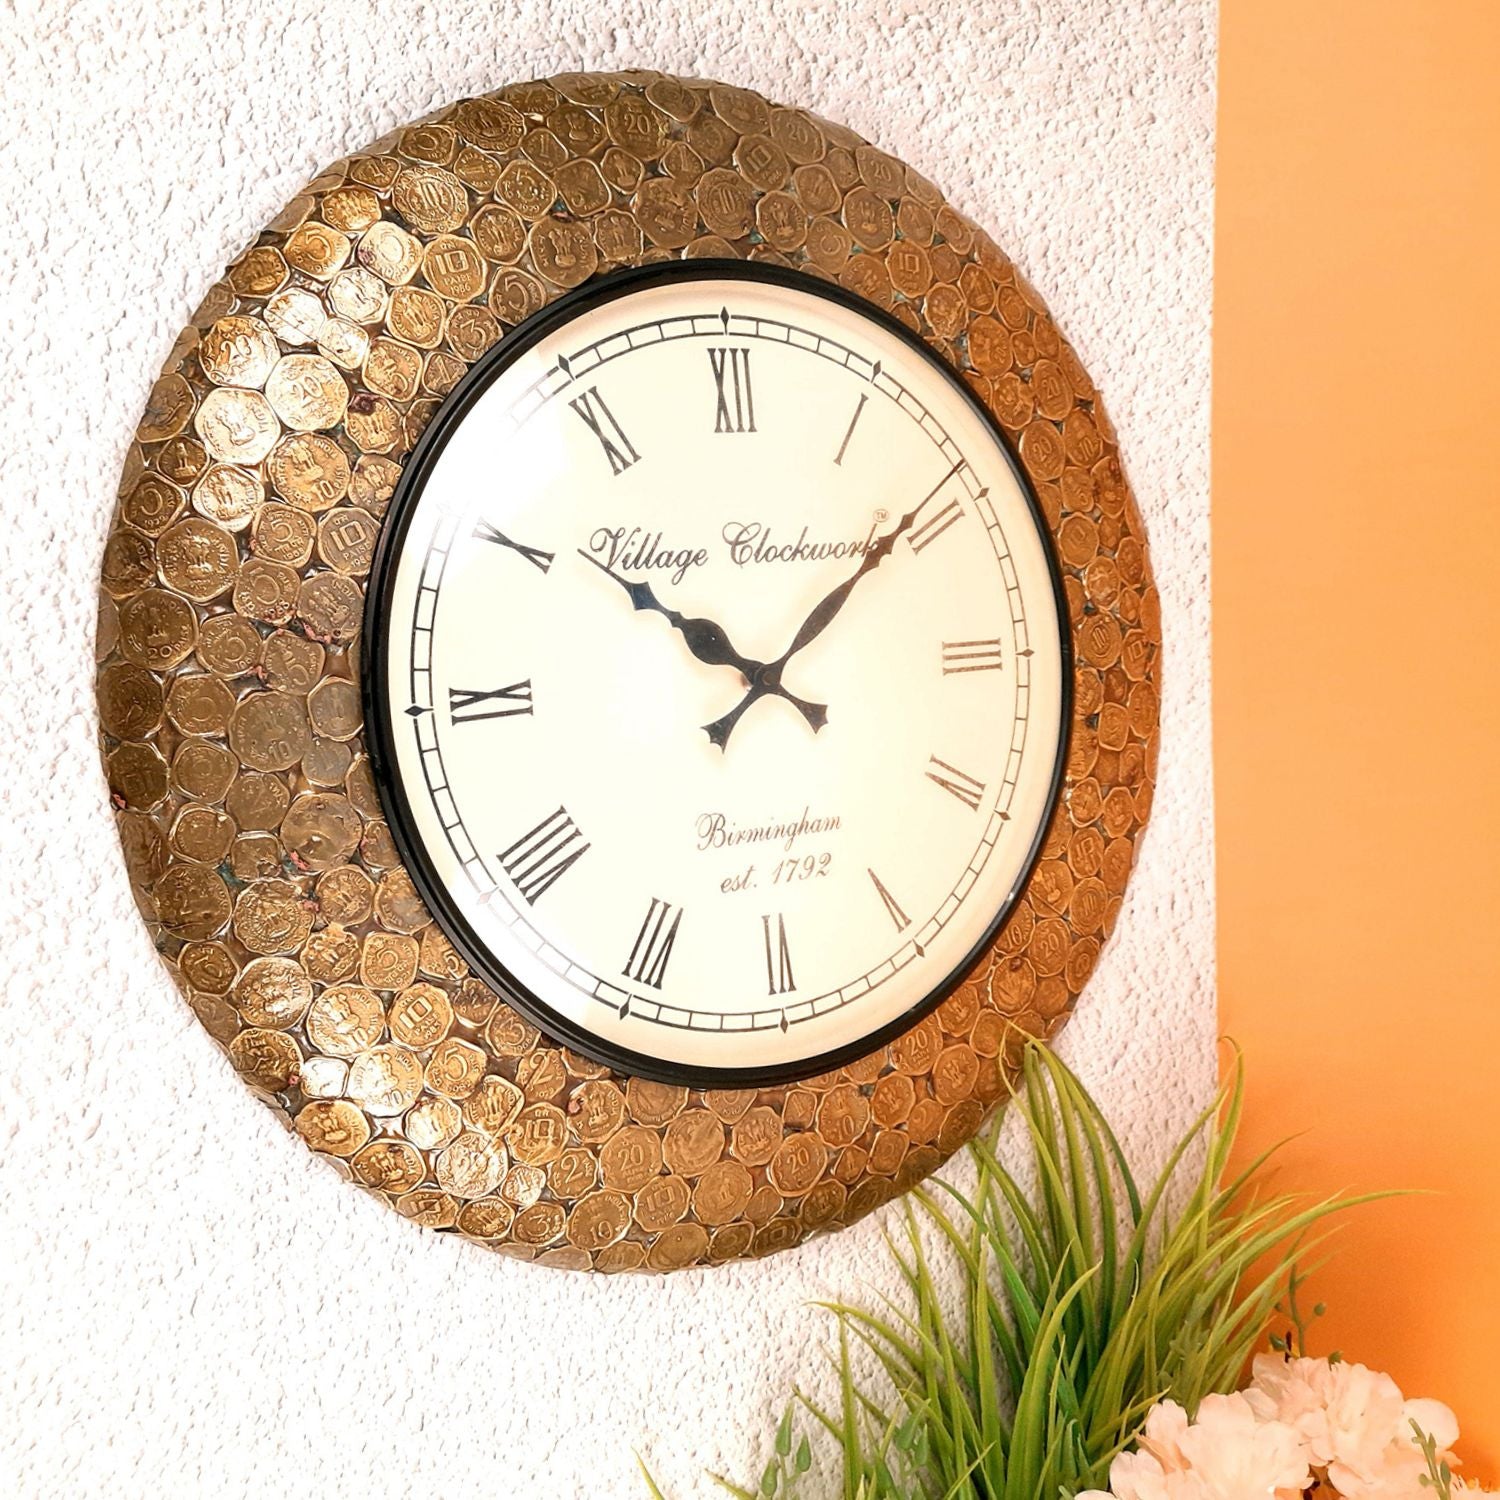 Wall Clock Vintage | Wall Mount Clock Antique With Old Coins Design - For Home, Office, Bedroom, Hall Decor & Gifts | Wedding & Housewarming Gift - 18 Inch - Apkamart